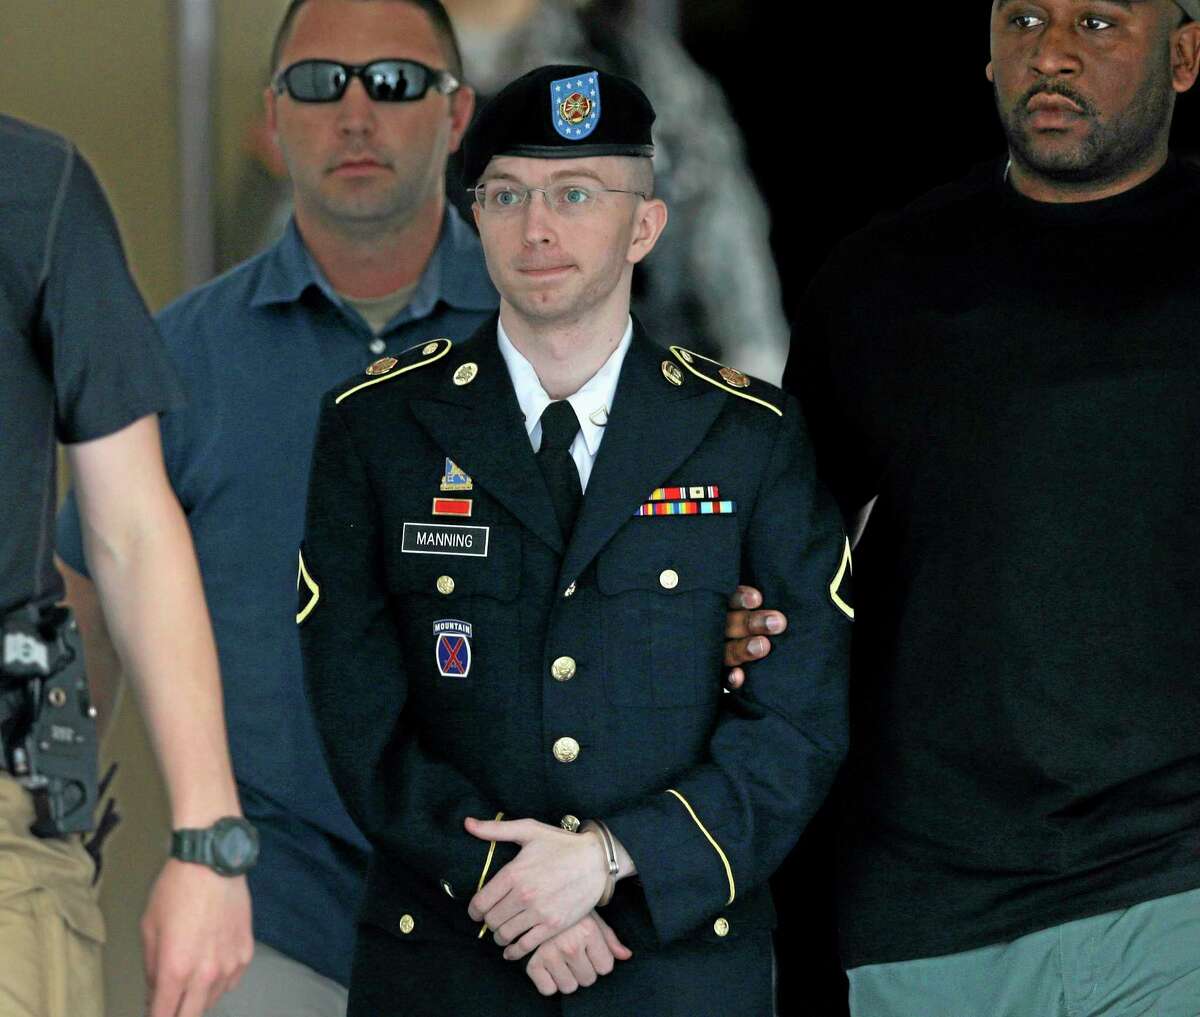 FILE - Army Pfc. Bradley Manning is escorted out of a courthouse in Fort Meade, Md., in a Tuesday, July 30, 2013 file photo, after receiving a verdict in his court martial. Manning's defense team is opening its case at the soldier's sentencing hearing. . (AP Photo/Patrick Semansky, File)